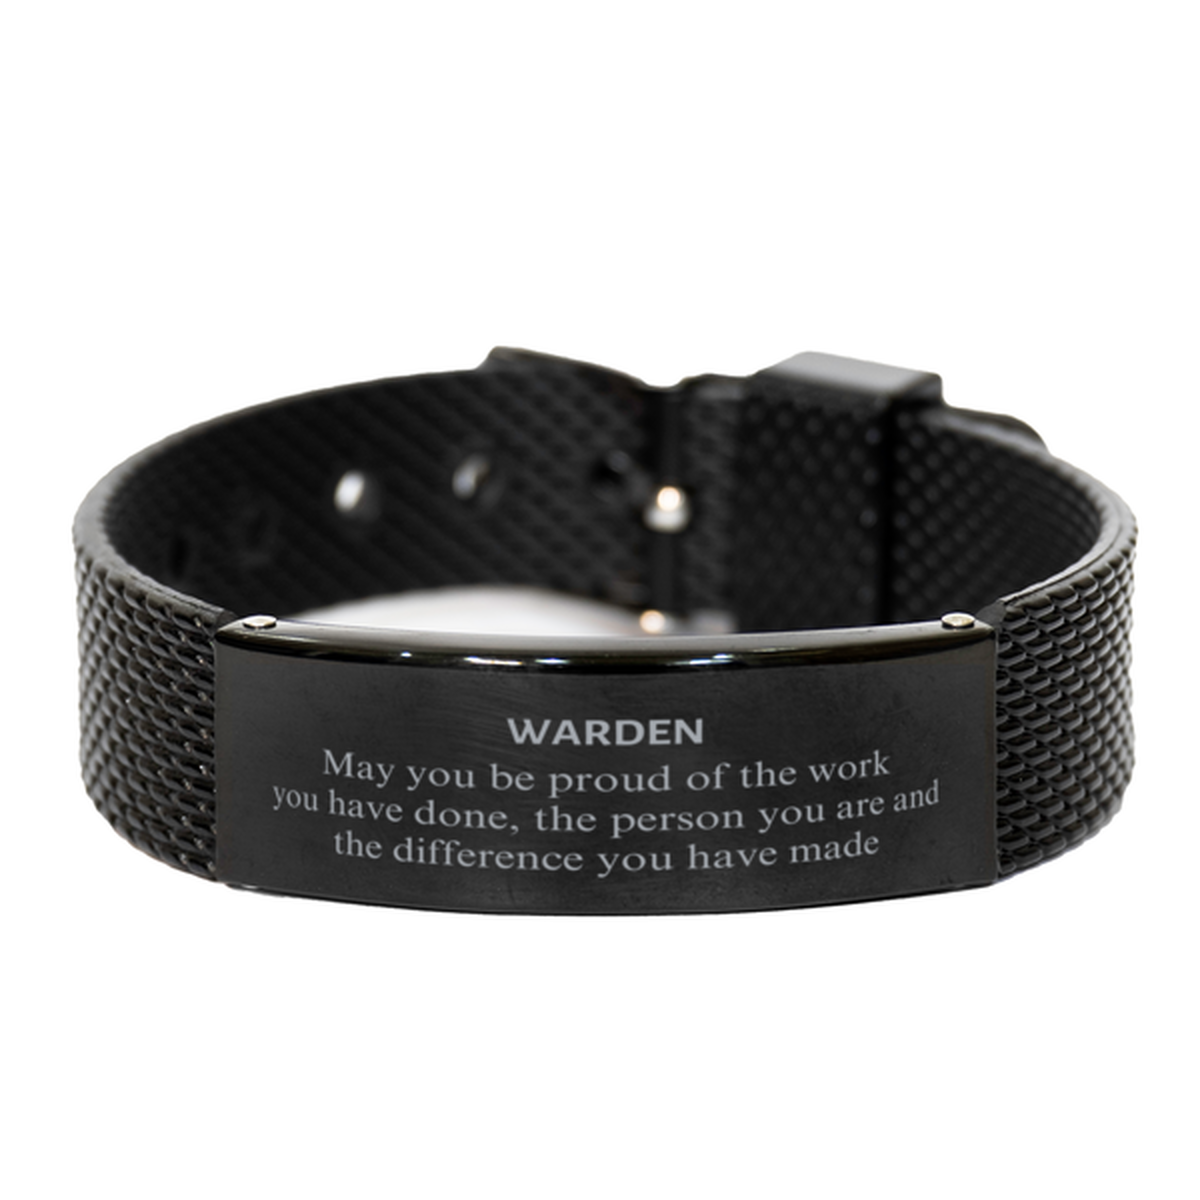 Warden May you be proud of the work you have done, Retirement Warden Black Shark Mesh Bracelet for Colleague Appreciation Gifts Amazing for Warden